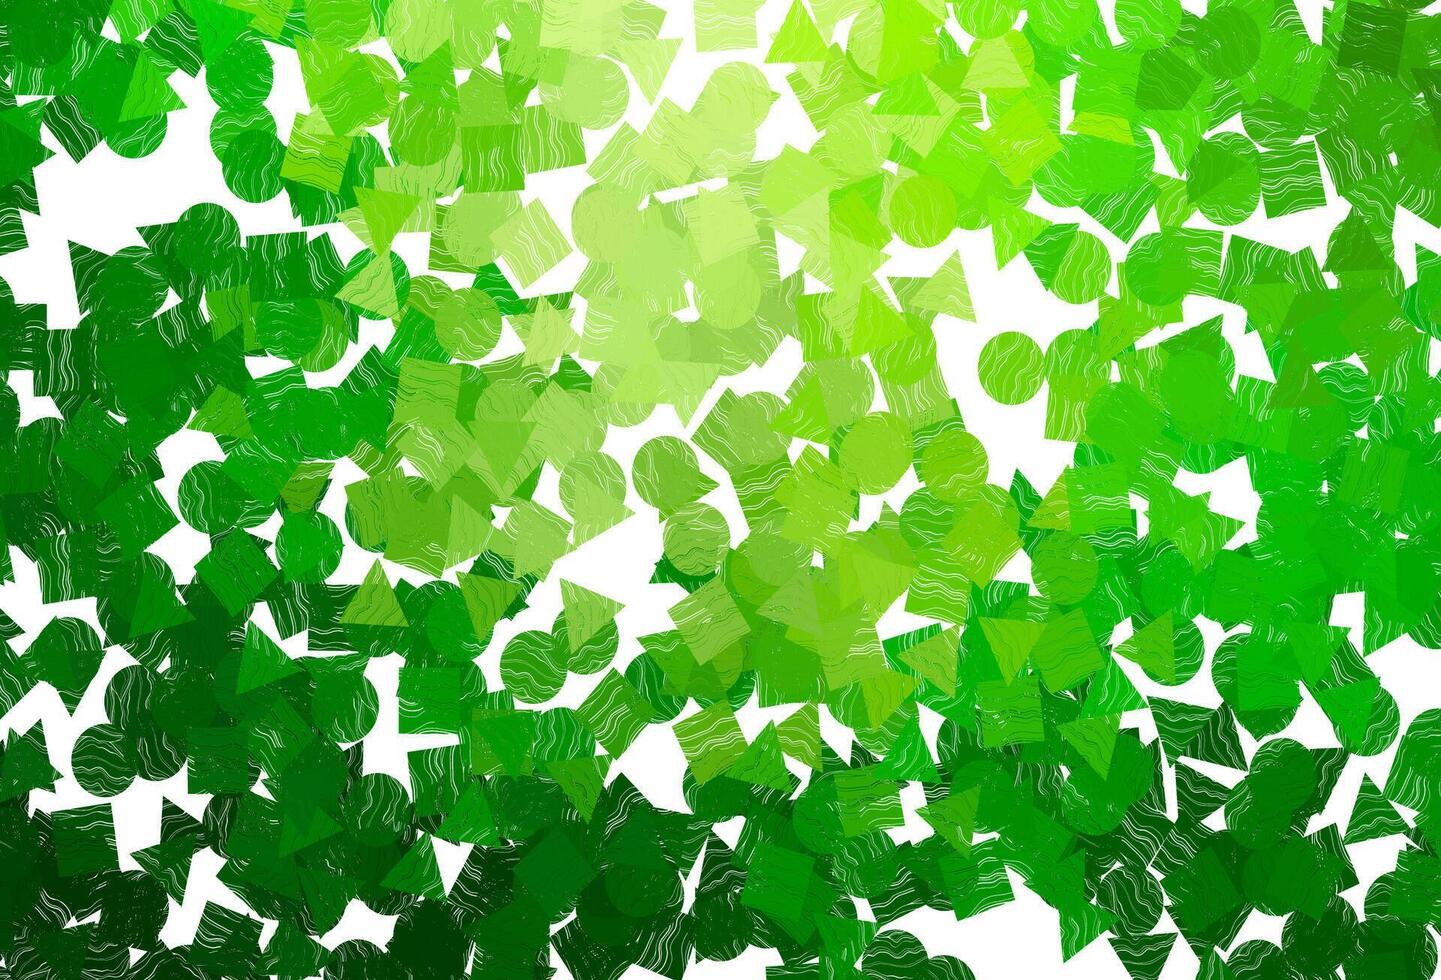 Light  green vector background with triangles, circles, cubes.